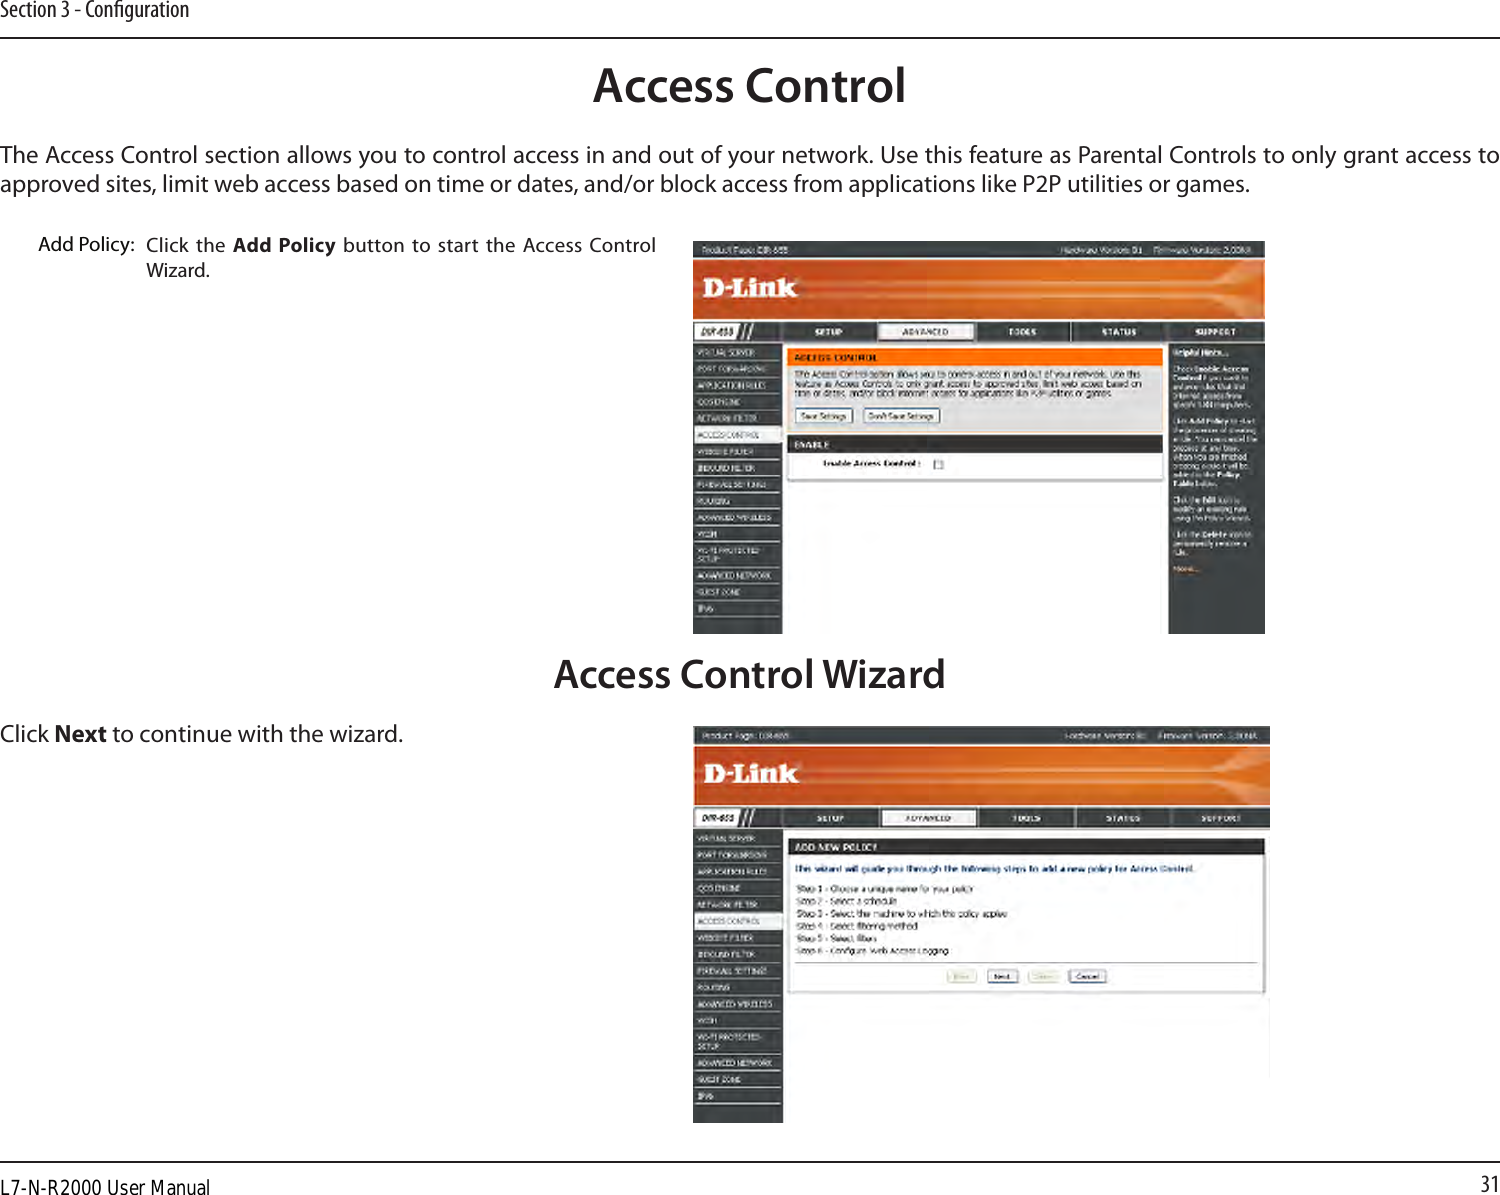 31Section 3 - CongurationAccess ControlClick the  Add  Policy  button to start the Access Control Wizard. Add Policy:The Access Control section allows you to control access in and out of your network. Use this feature as Parental Controls to only grant access to approved sites, limit web access based on time or dates, and/or block access from applications like P2P utilities or games.Click Next to continue with the wizard.Access Control WizardL7-N-R2000 User Manual